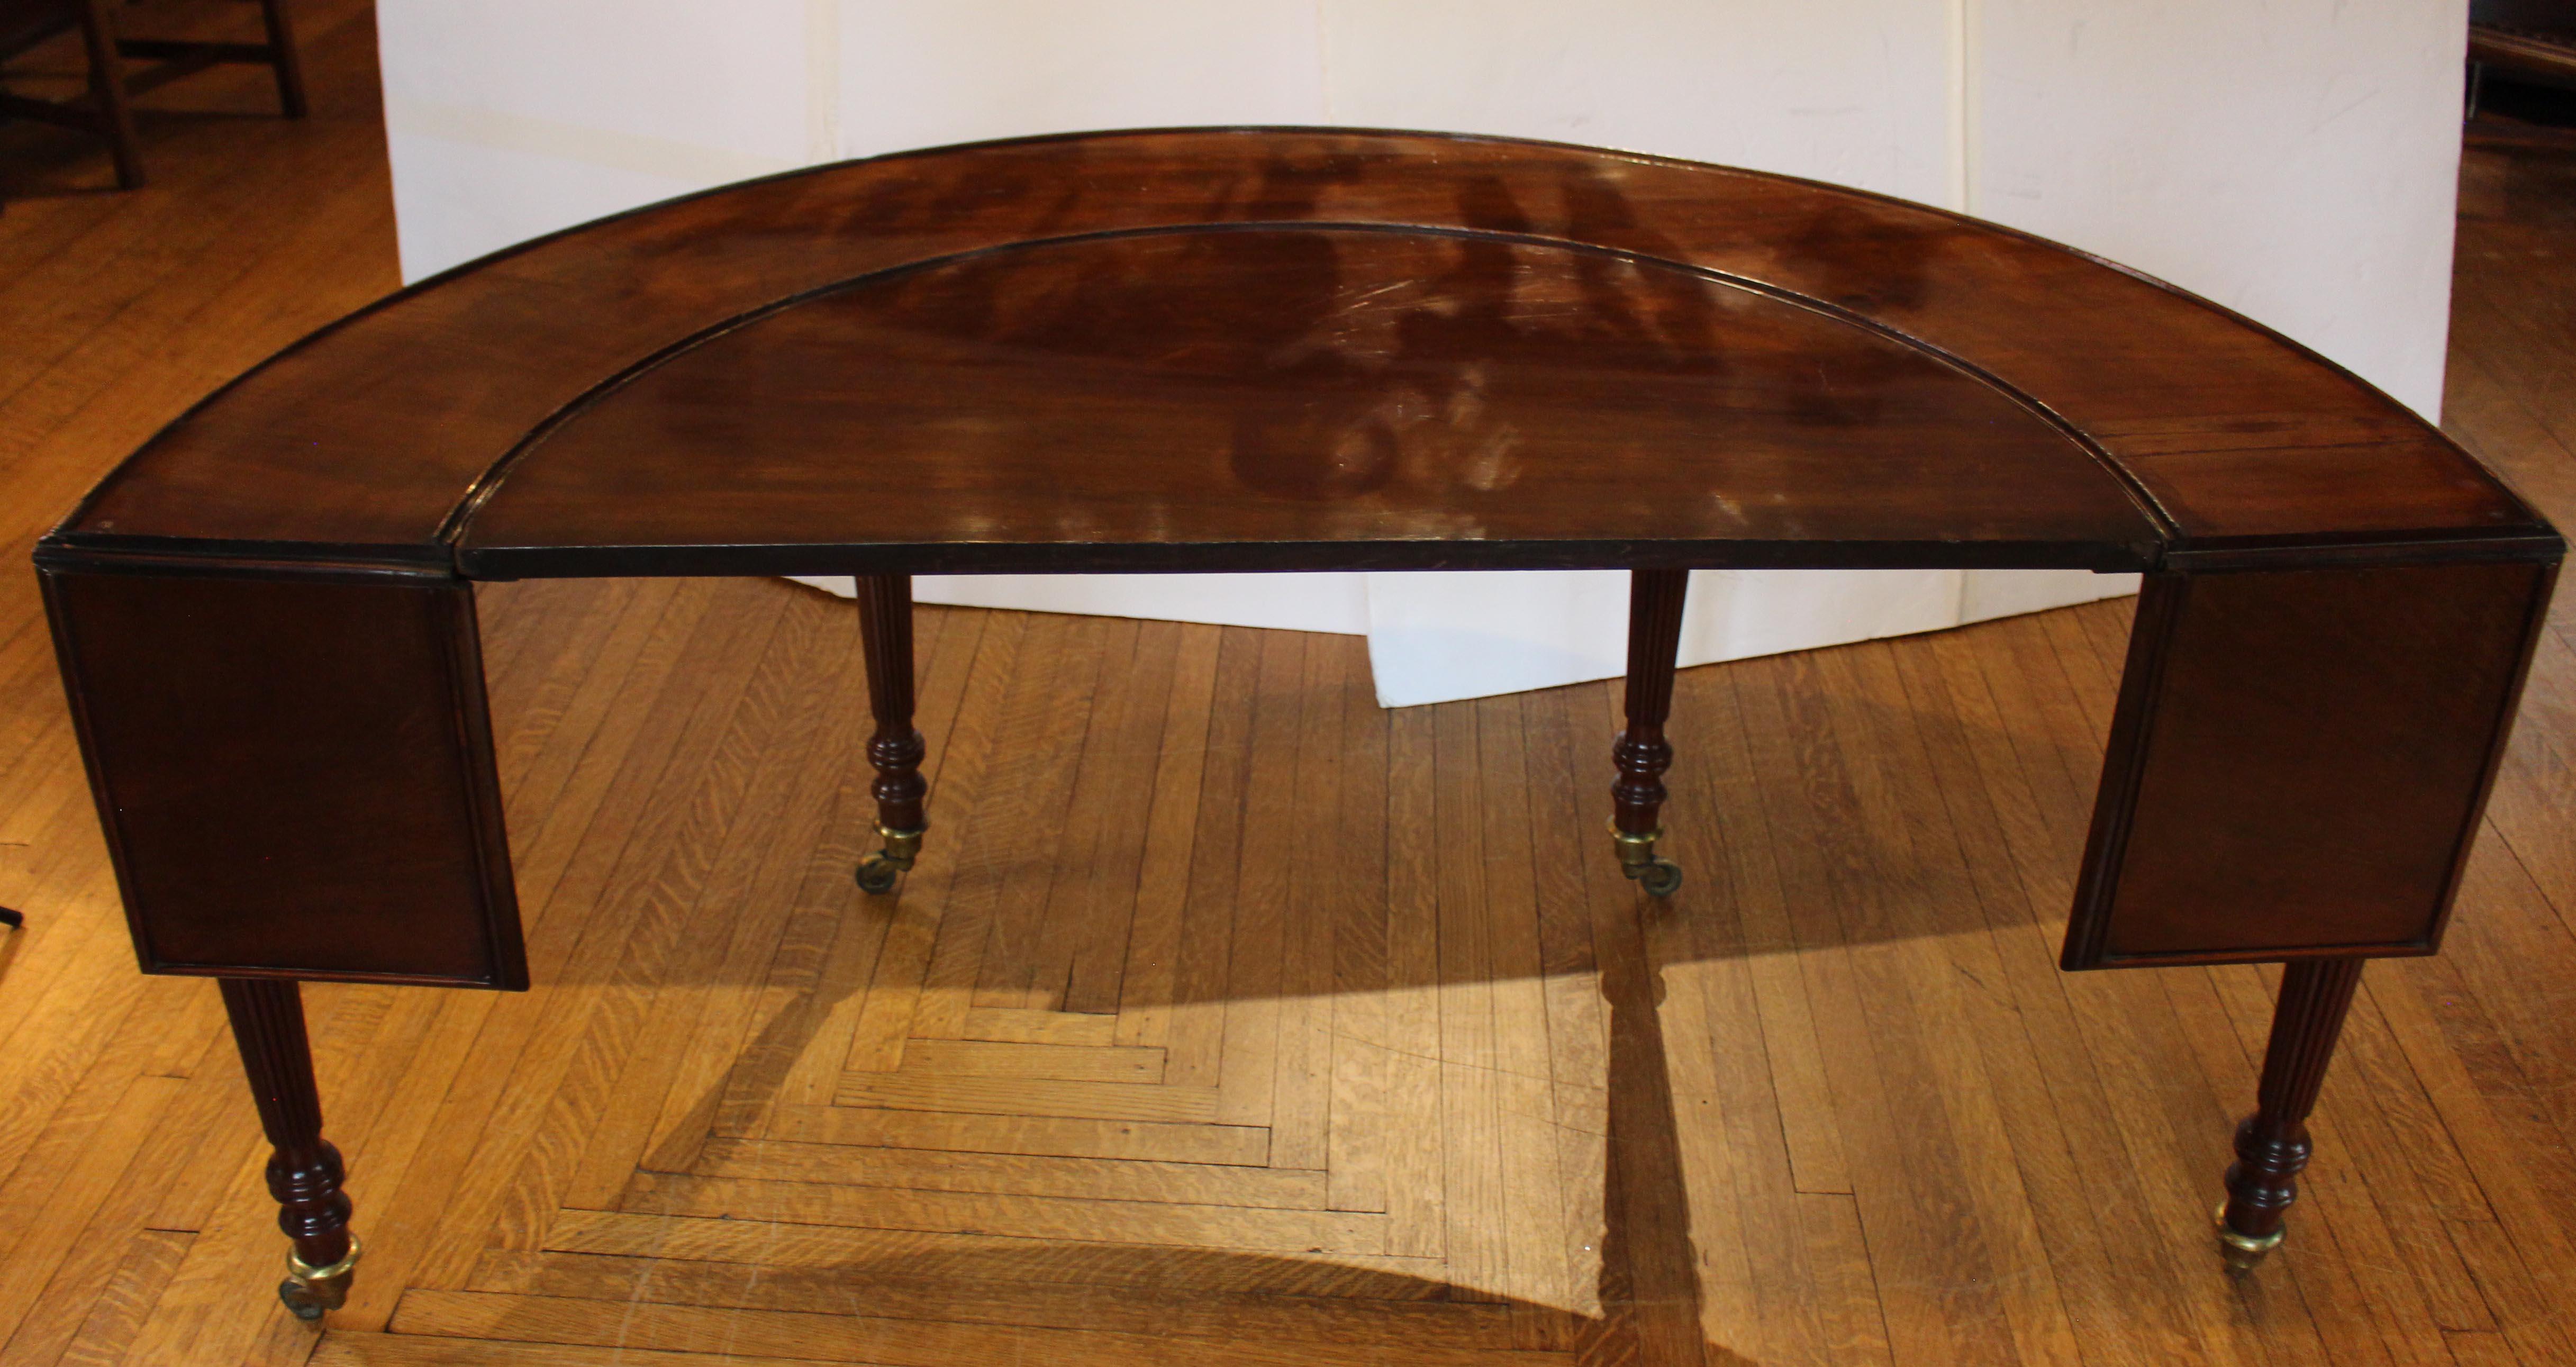 Circa 1825 Rare Form English Drinking Table In Good Condition For Sale In Chapel Hill, NC